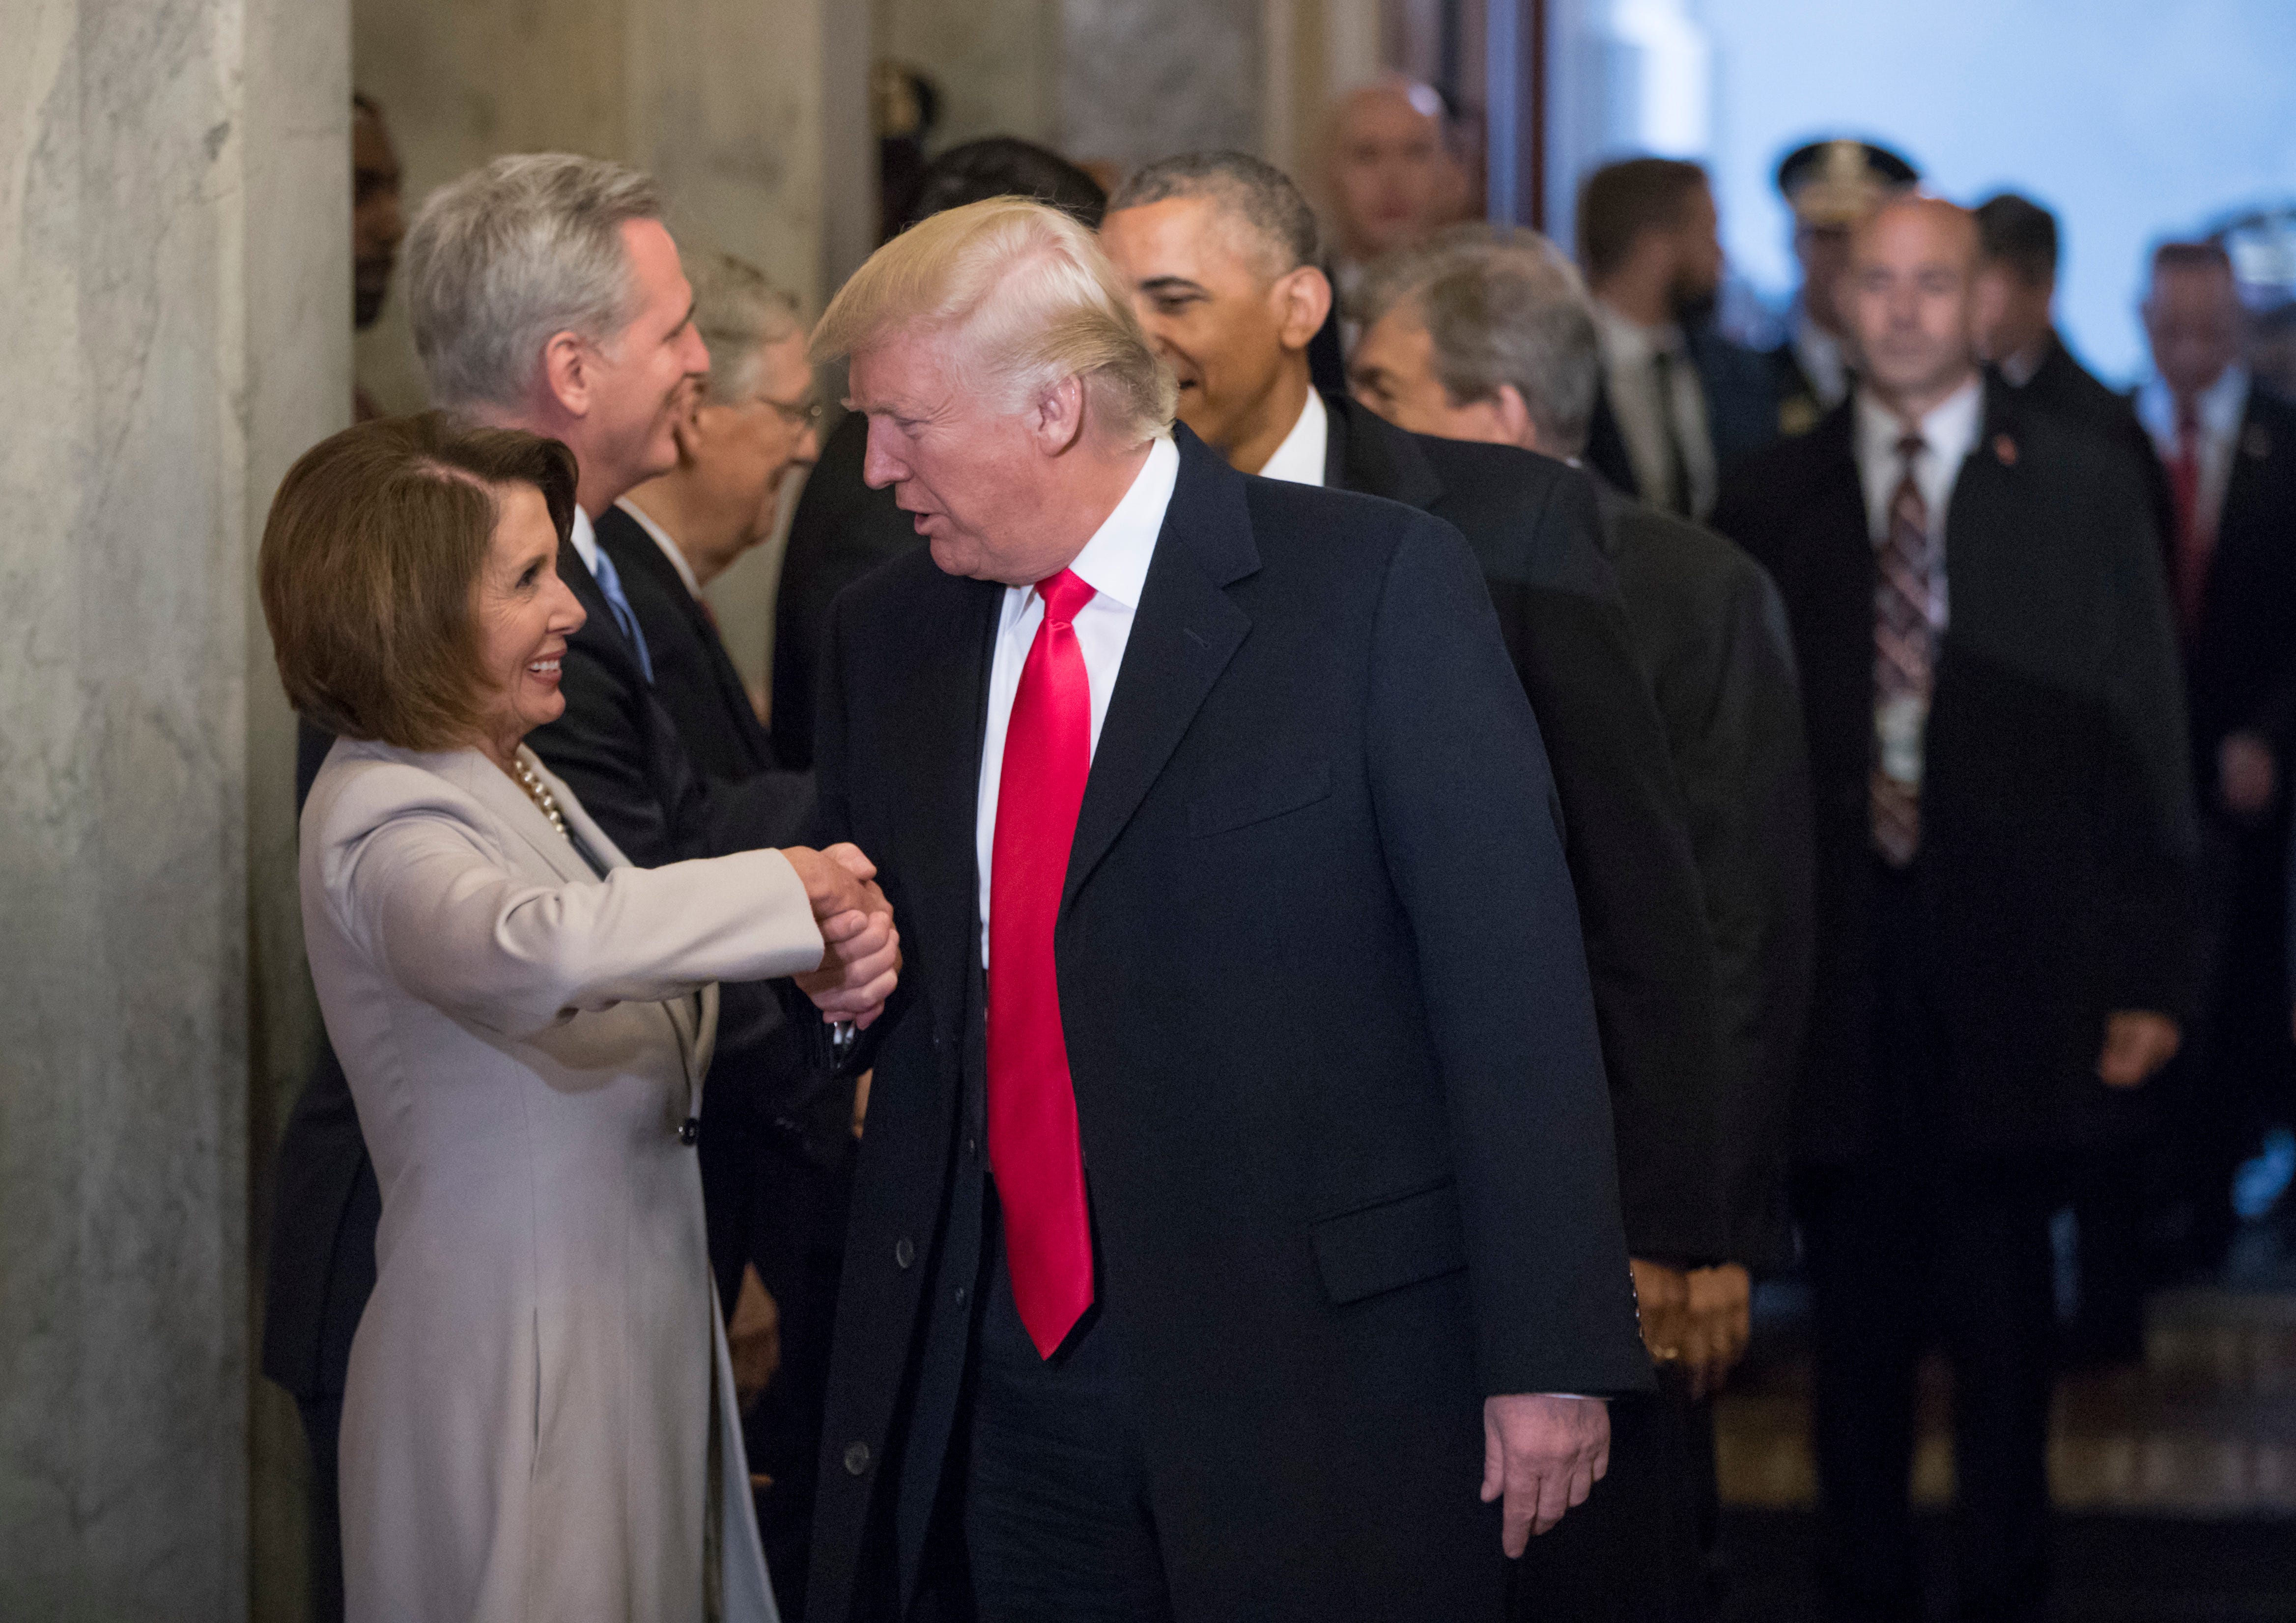 In this 2017 photo, then-President-elect Donald Trump greets House Democratic leader Nancy Pelosi.